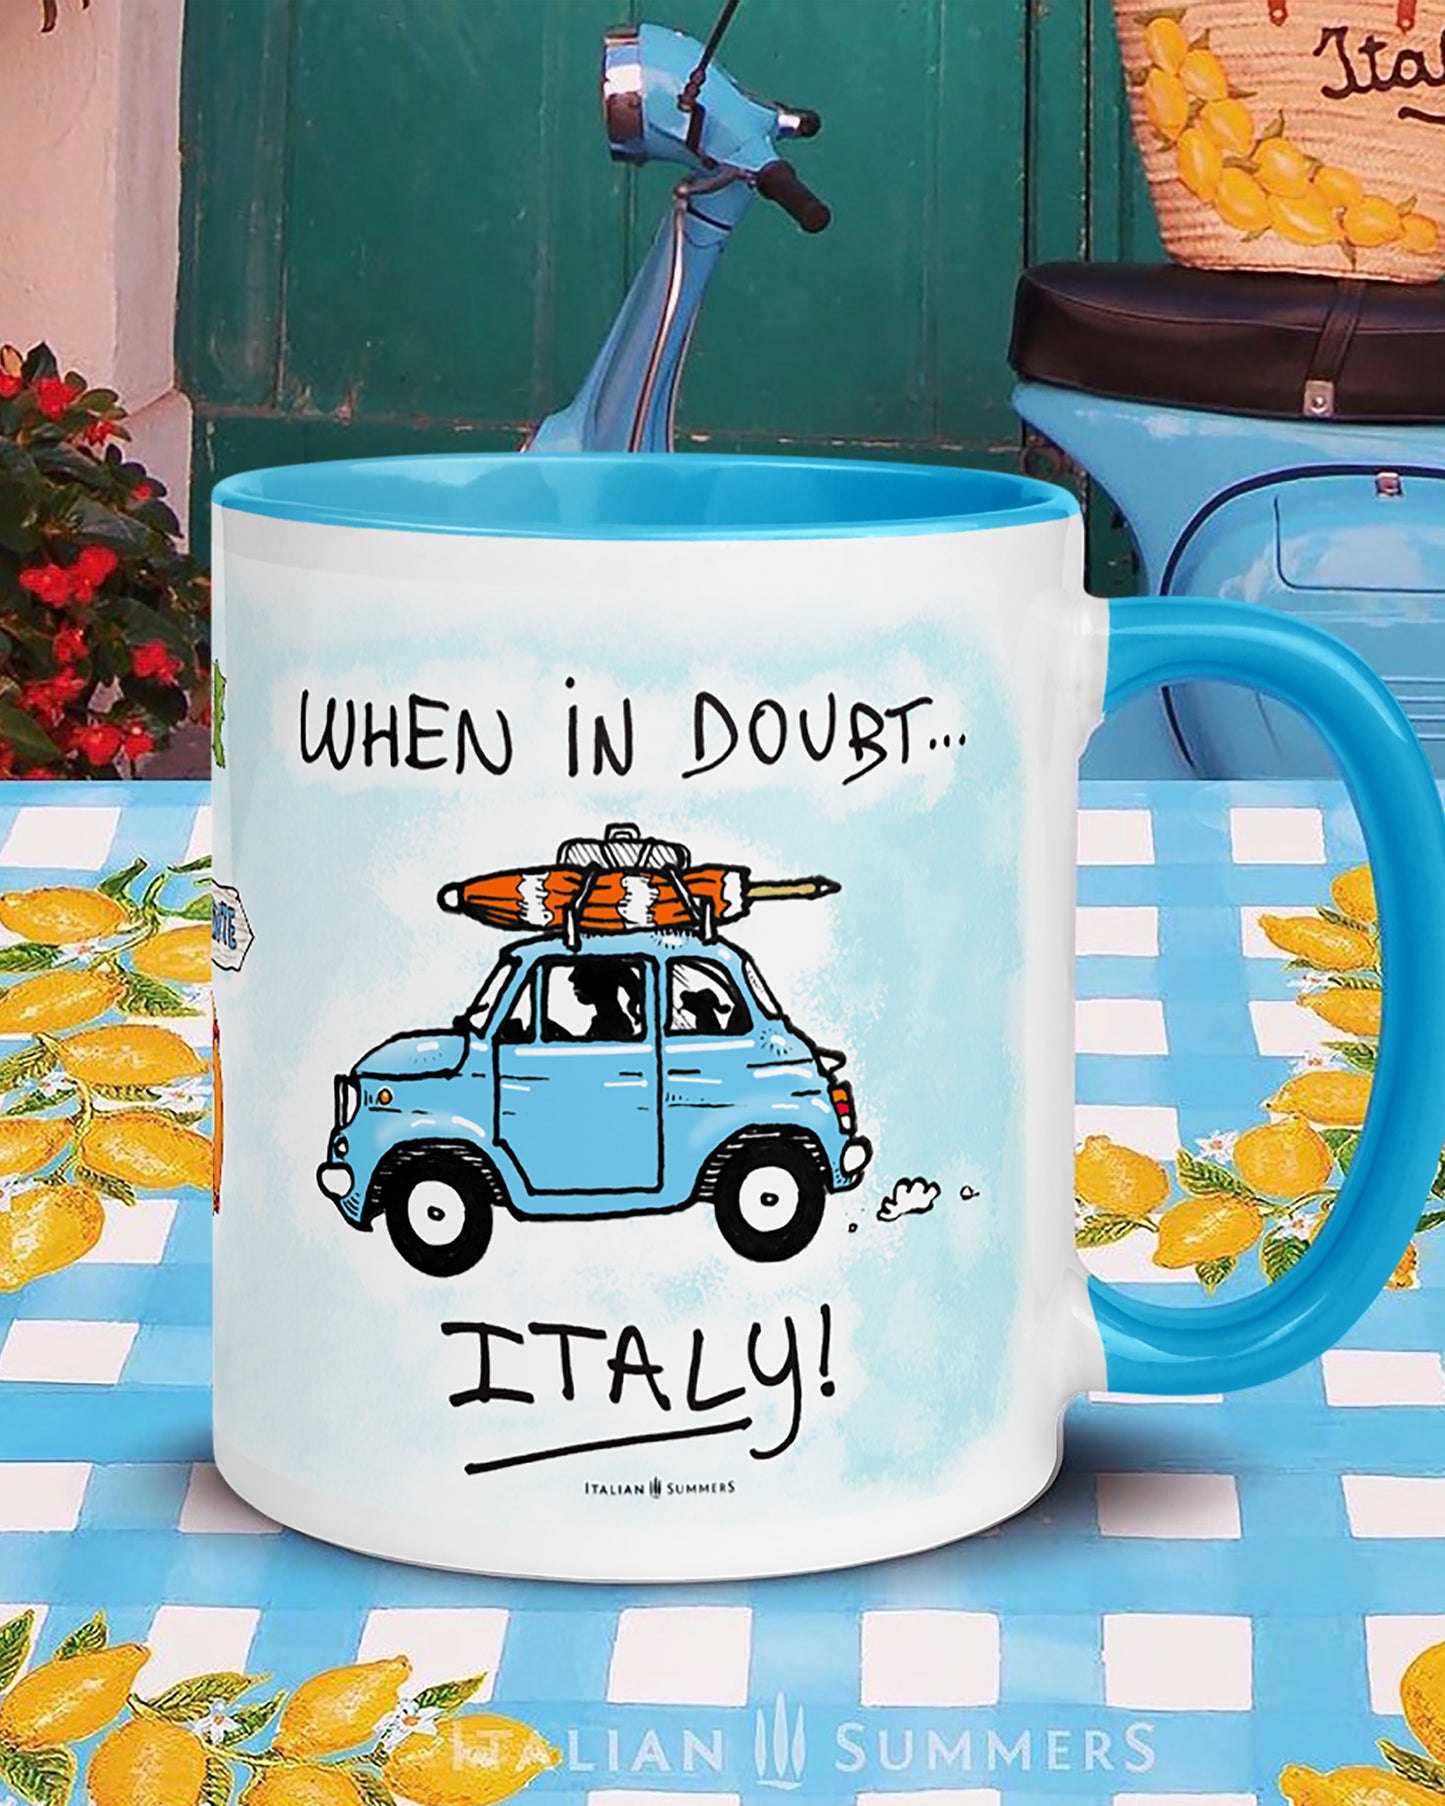 Italy inspired coffee mug with the handwritten quote 'When in doubt, Italy'. There is  a sketch on both sides of the mug of an aqua blue Cinquecento which has a closed beach umbrella on top of the car. A lady is drivng the car and there is a little dog in the back of the car with floppy ears. Made by Italian Summers